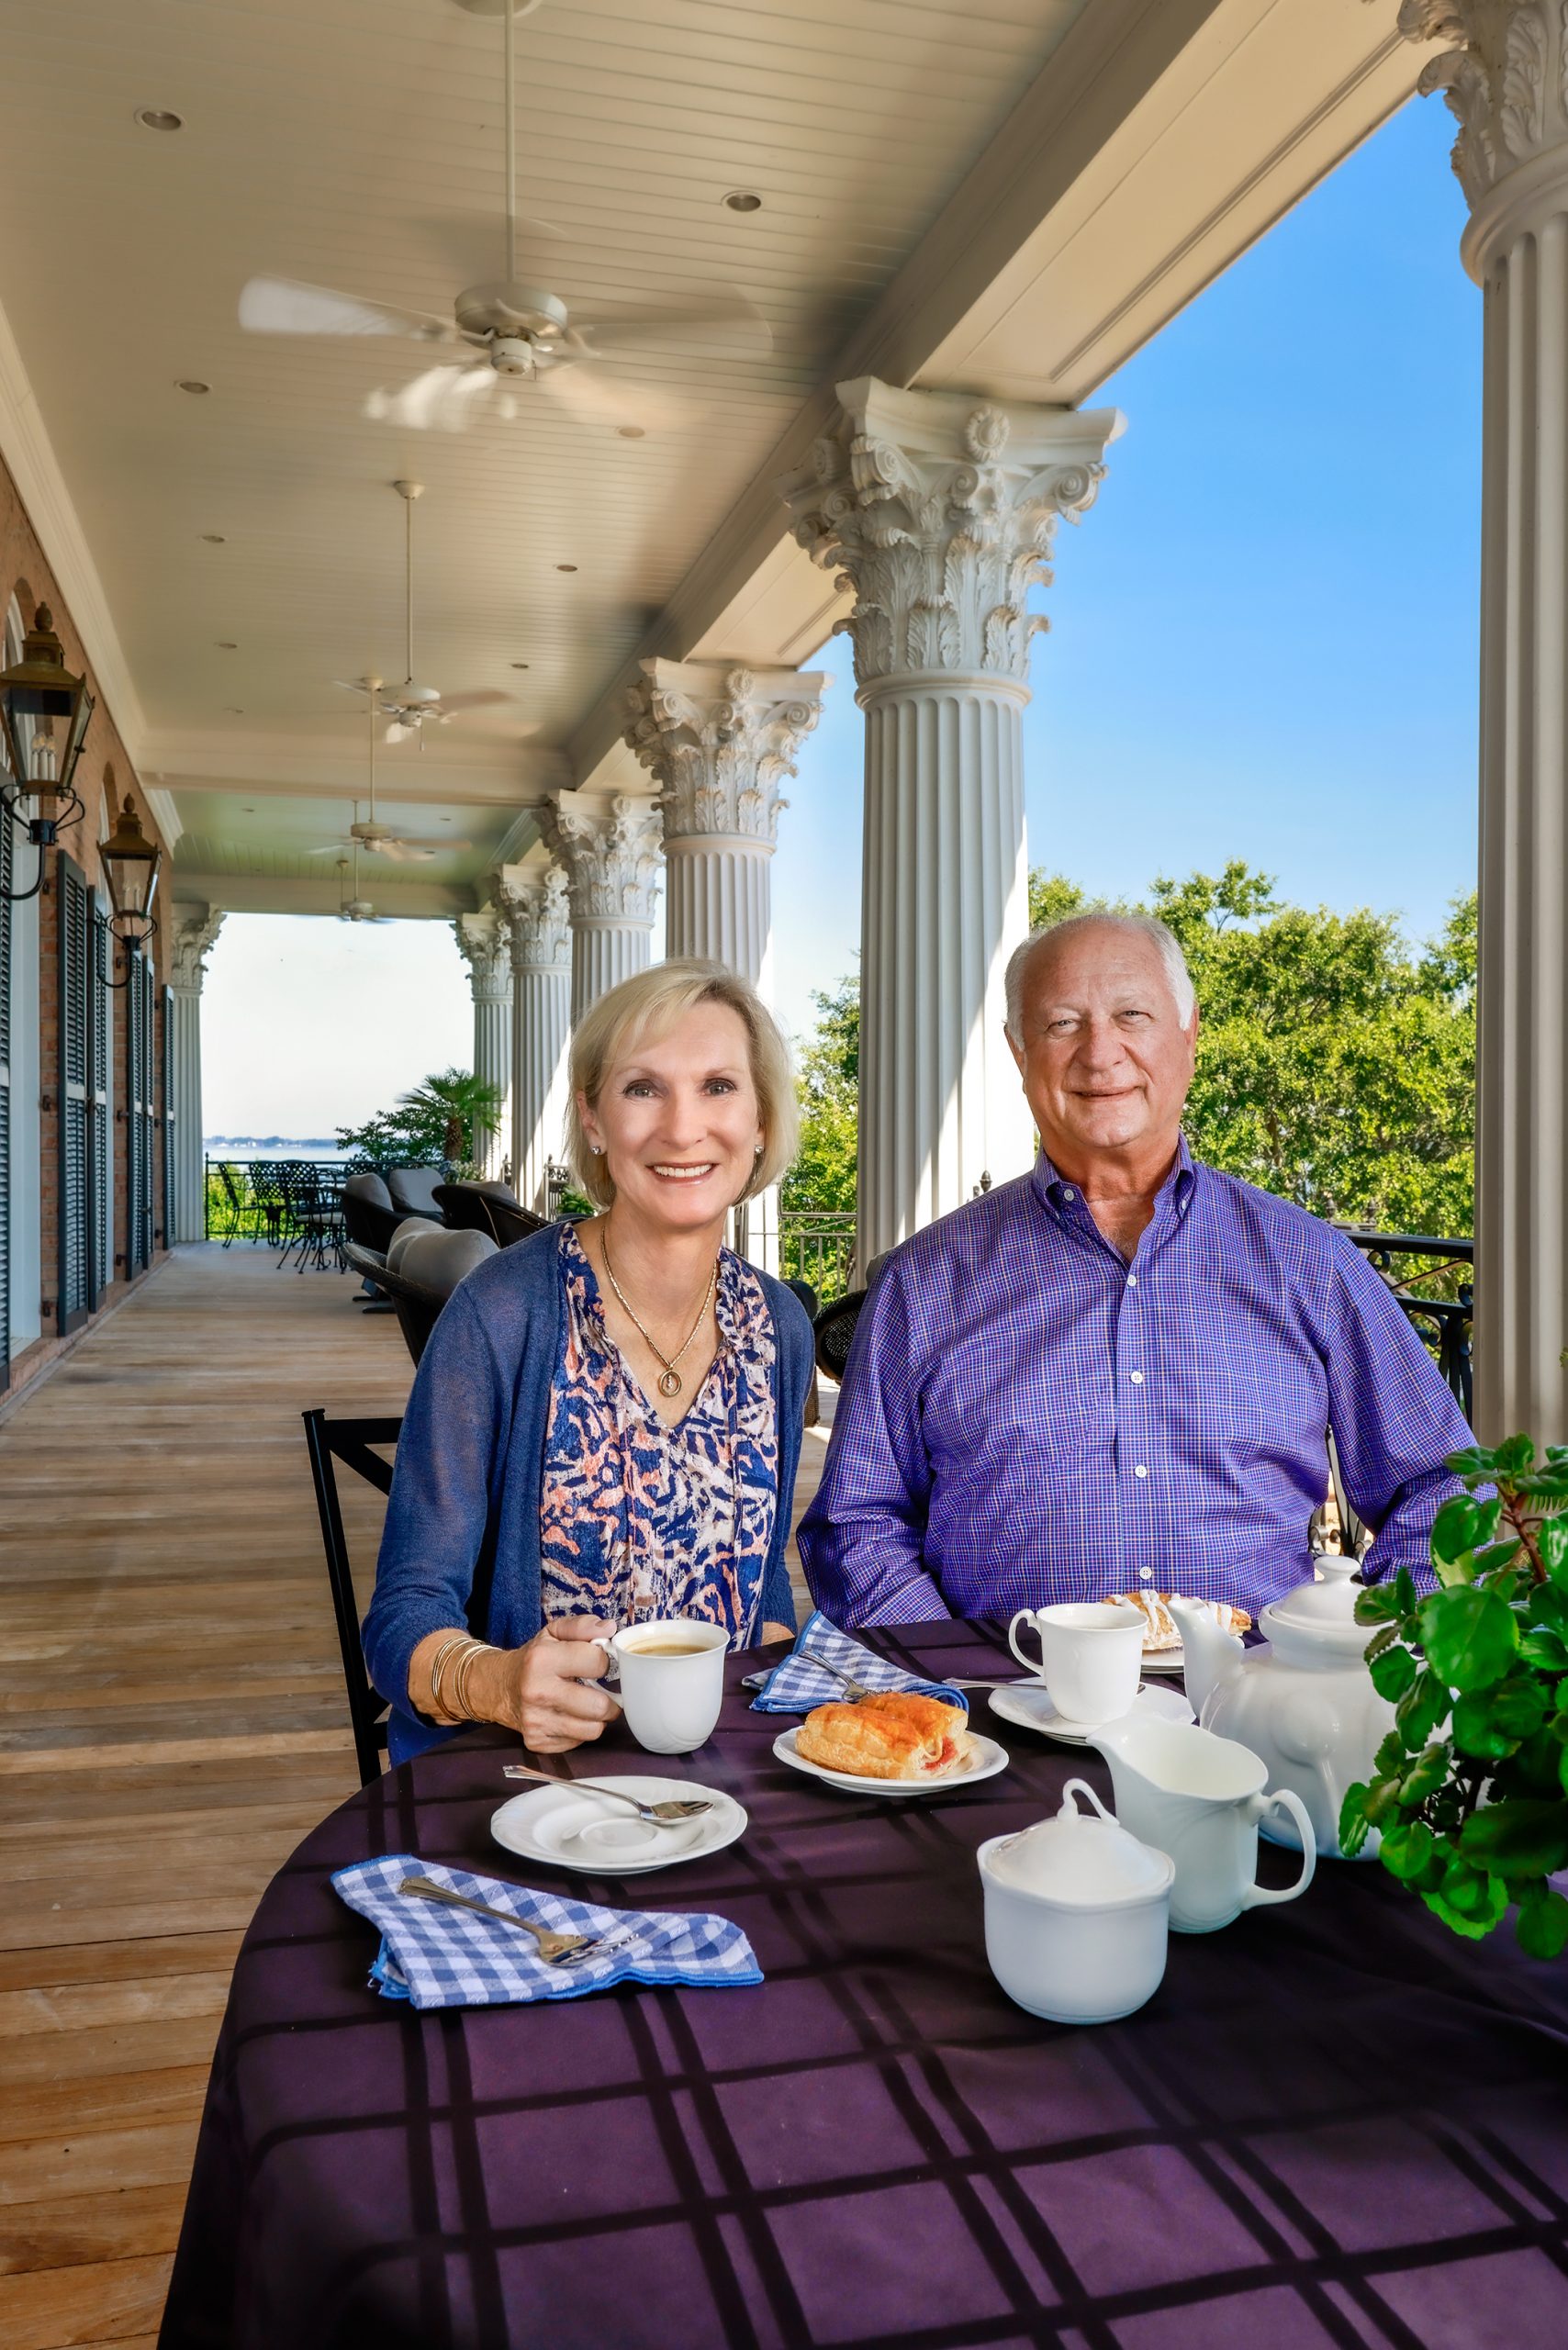 The 8,000 square feet of porches are made with Brazilian walnut and scattered with numerous seating areas for relaxing, reading, visiting, and dining. Cathy and Kenyon love to have coffee outside their bedroom and enjoy the expansive views.
